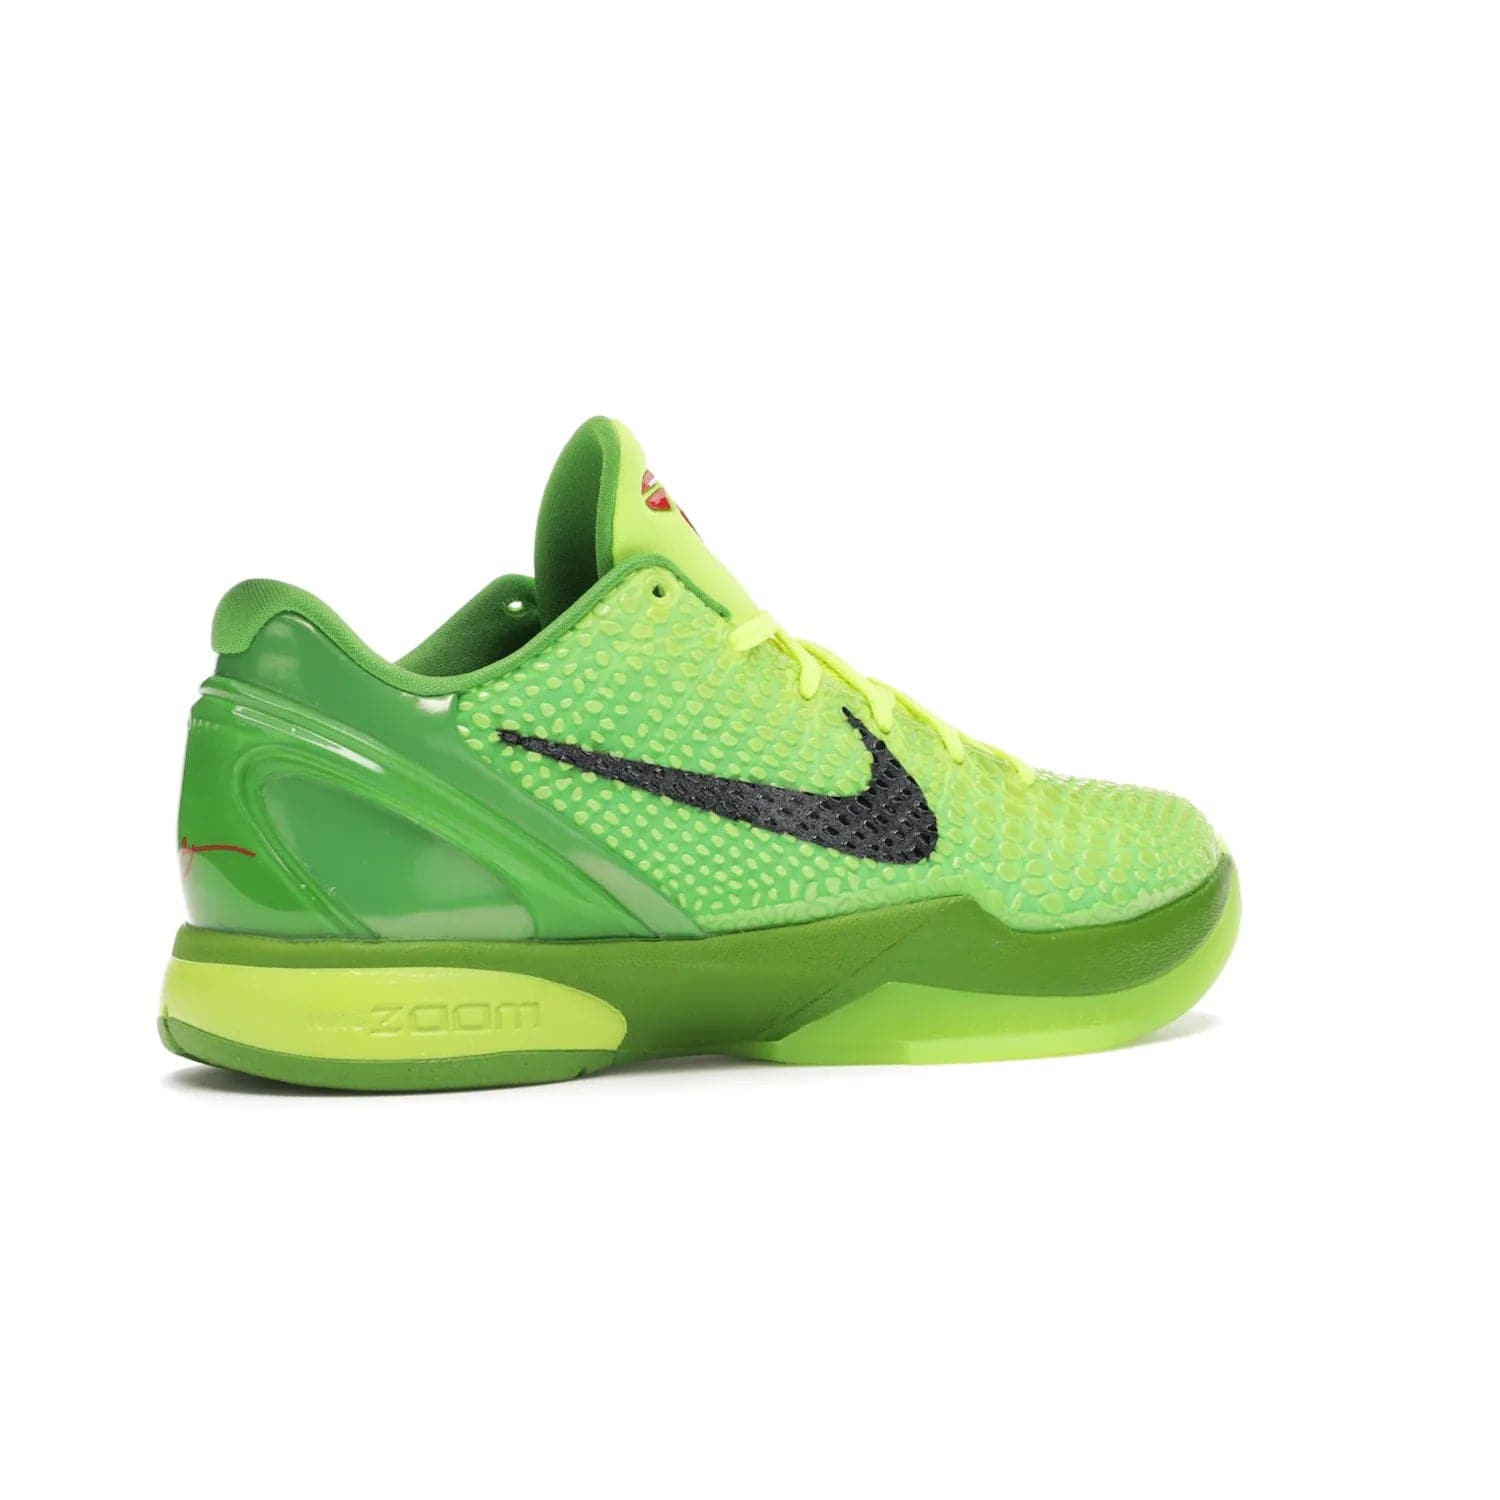 Nike Kobe 6 Protro Grinch (2020) - Image 34 - Only at www.BallersClubKickz.com - #
The Nike Kobe 6 Protro Grinch updates the iconic 2011 design with modern tech like a Zoom Air cushioning system, scaled-down traction, and updated silhouette. Experience the textured Green Apple and Volt upper plus bright red and green accents for $180.